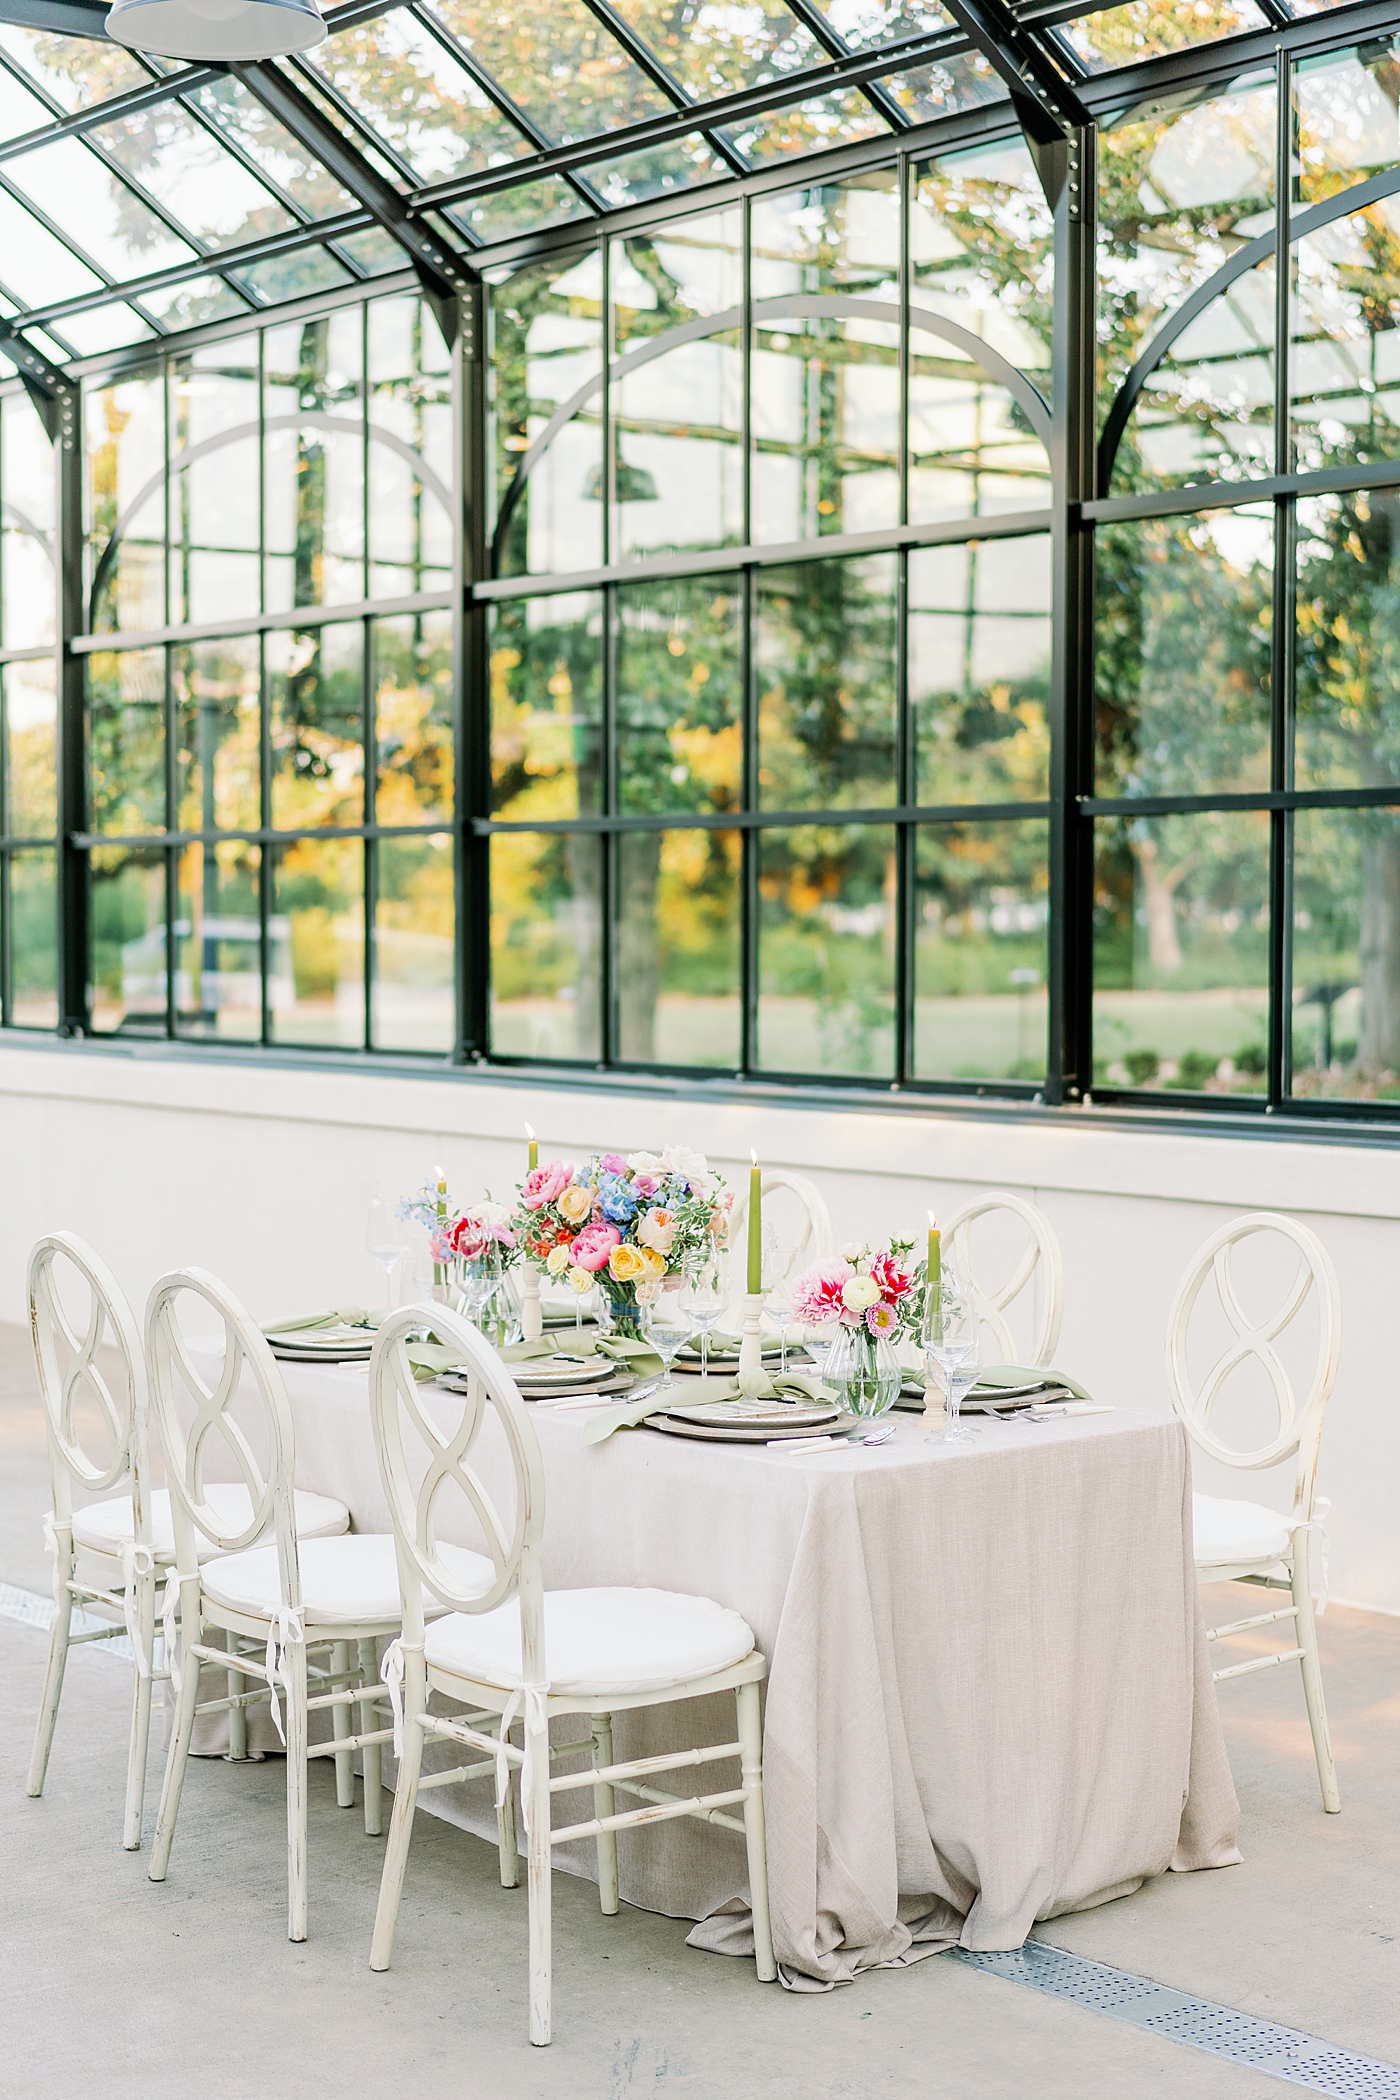 Styled table with bright florals during summer inspired garden wedding | Photo by Annie Laura Photo